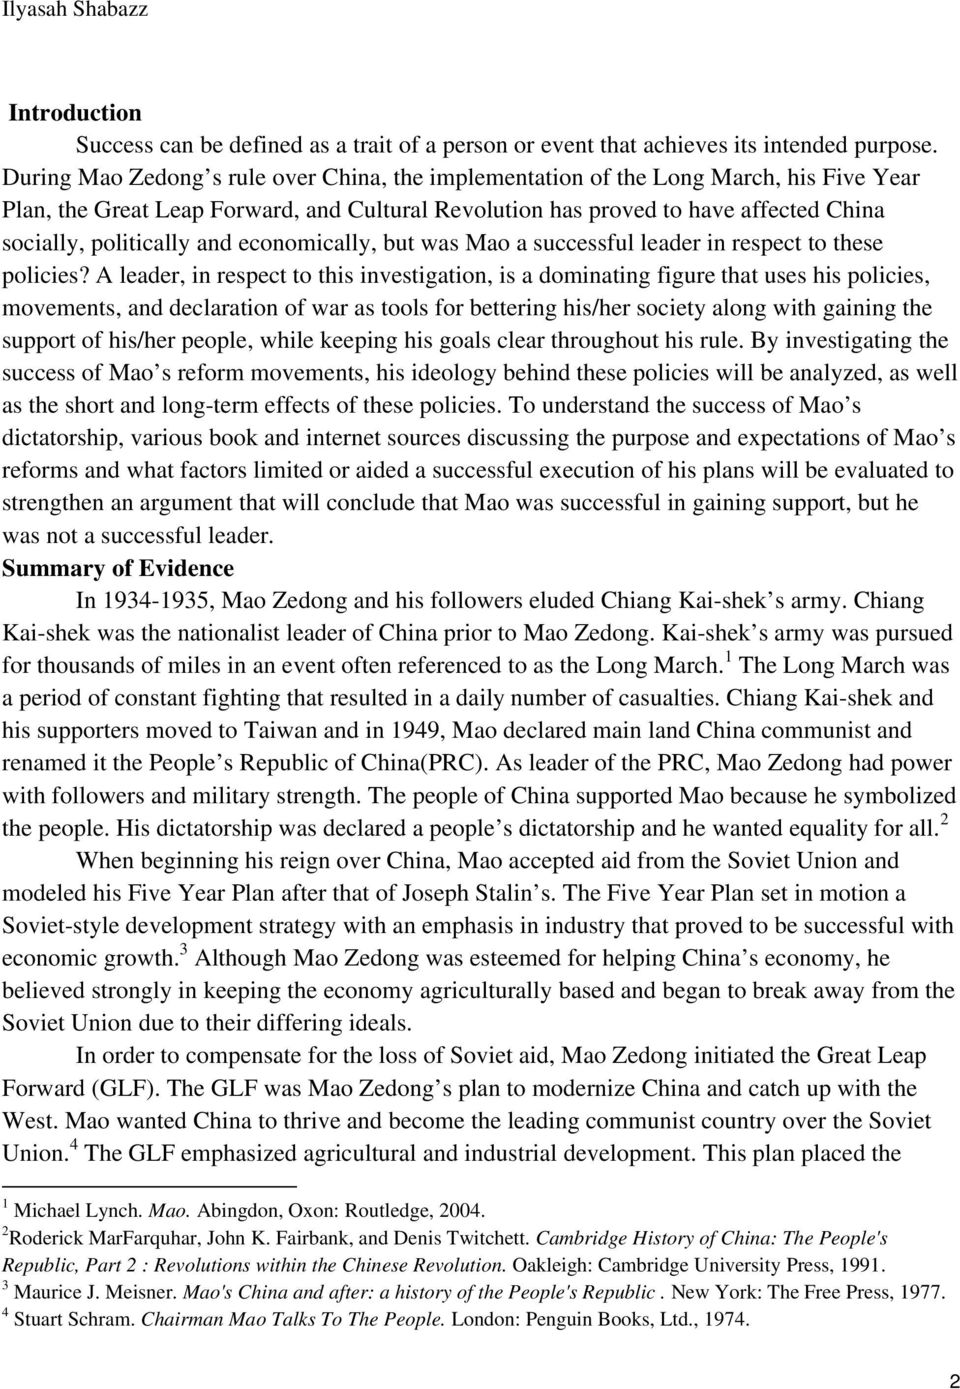 and economically, but was Mao a successful leader in respect to these policies?